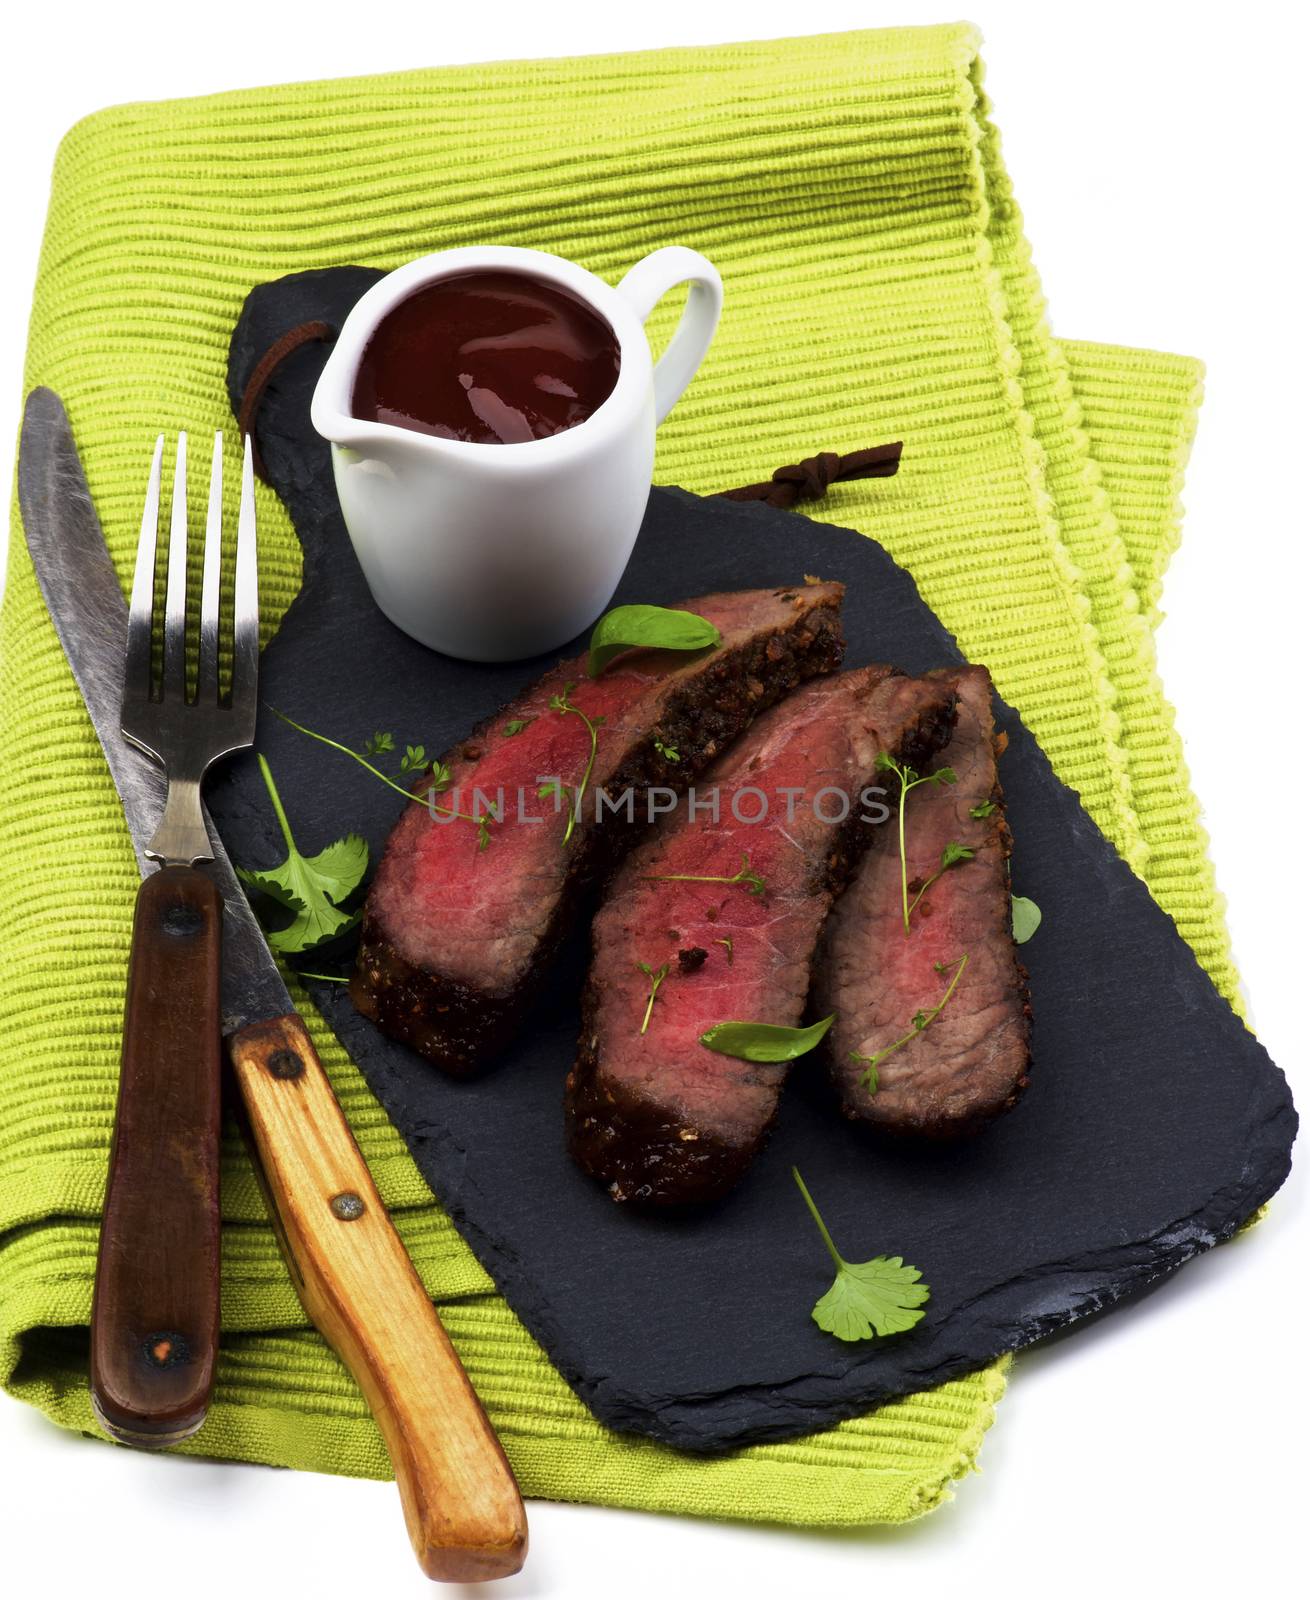 Slices of Delicious Roast Beef Medium Rare on Slate Serving Board with Tomato Sauce, Fork and Table Knife closeup on Green Napkin